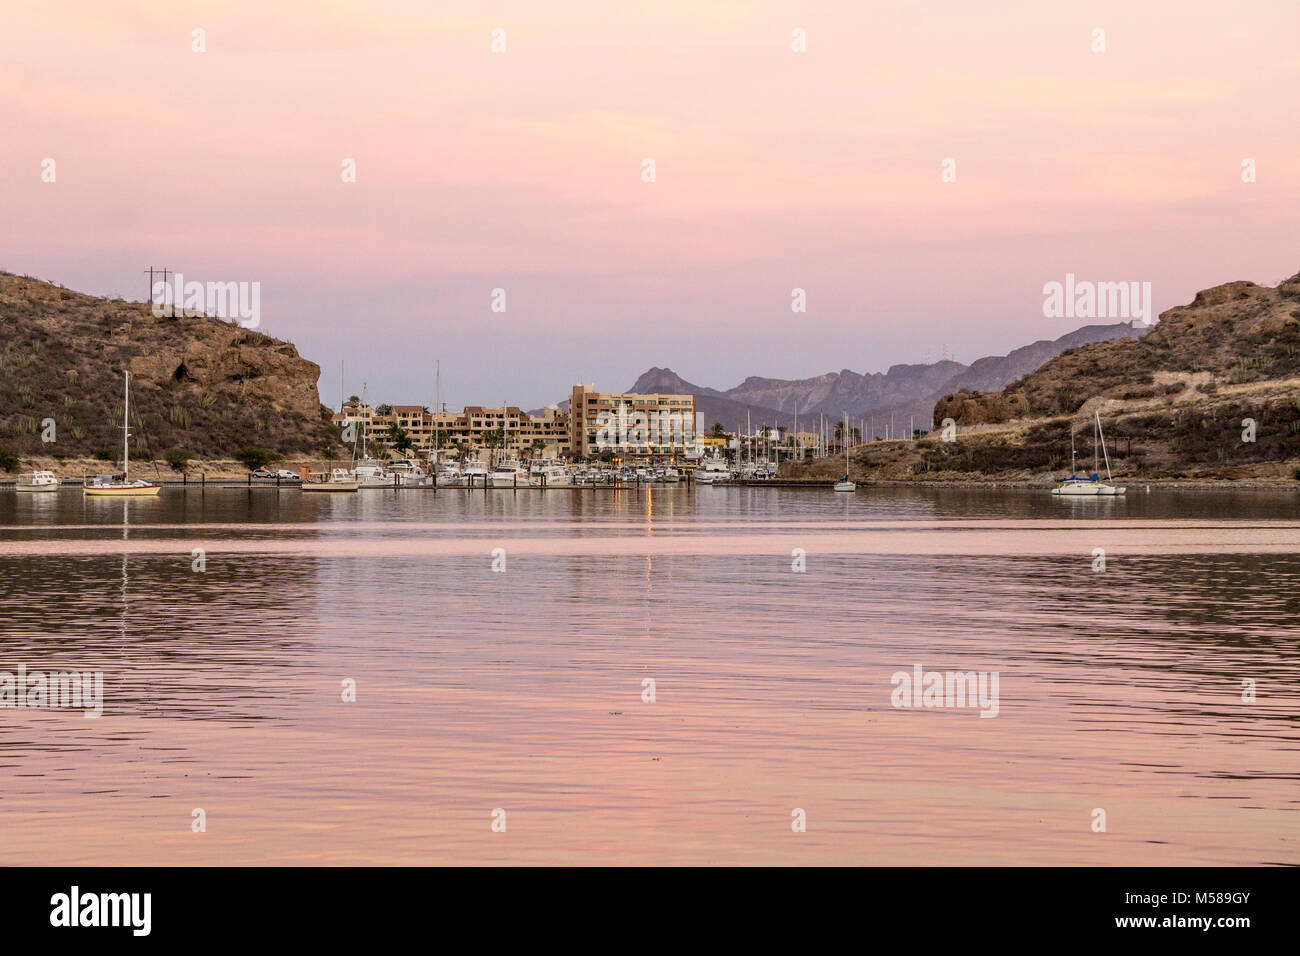 lovely rose tinted twilight sky reflected in calm water of San Carlos bay with San Carlos Marina boats hotel shops in distance across glowing bay Stock Photo